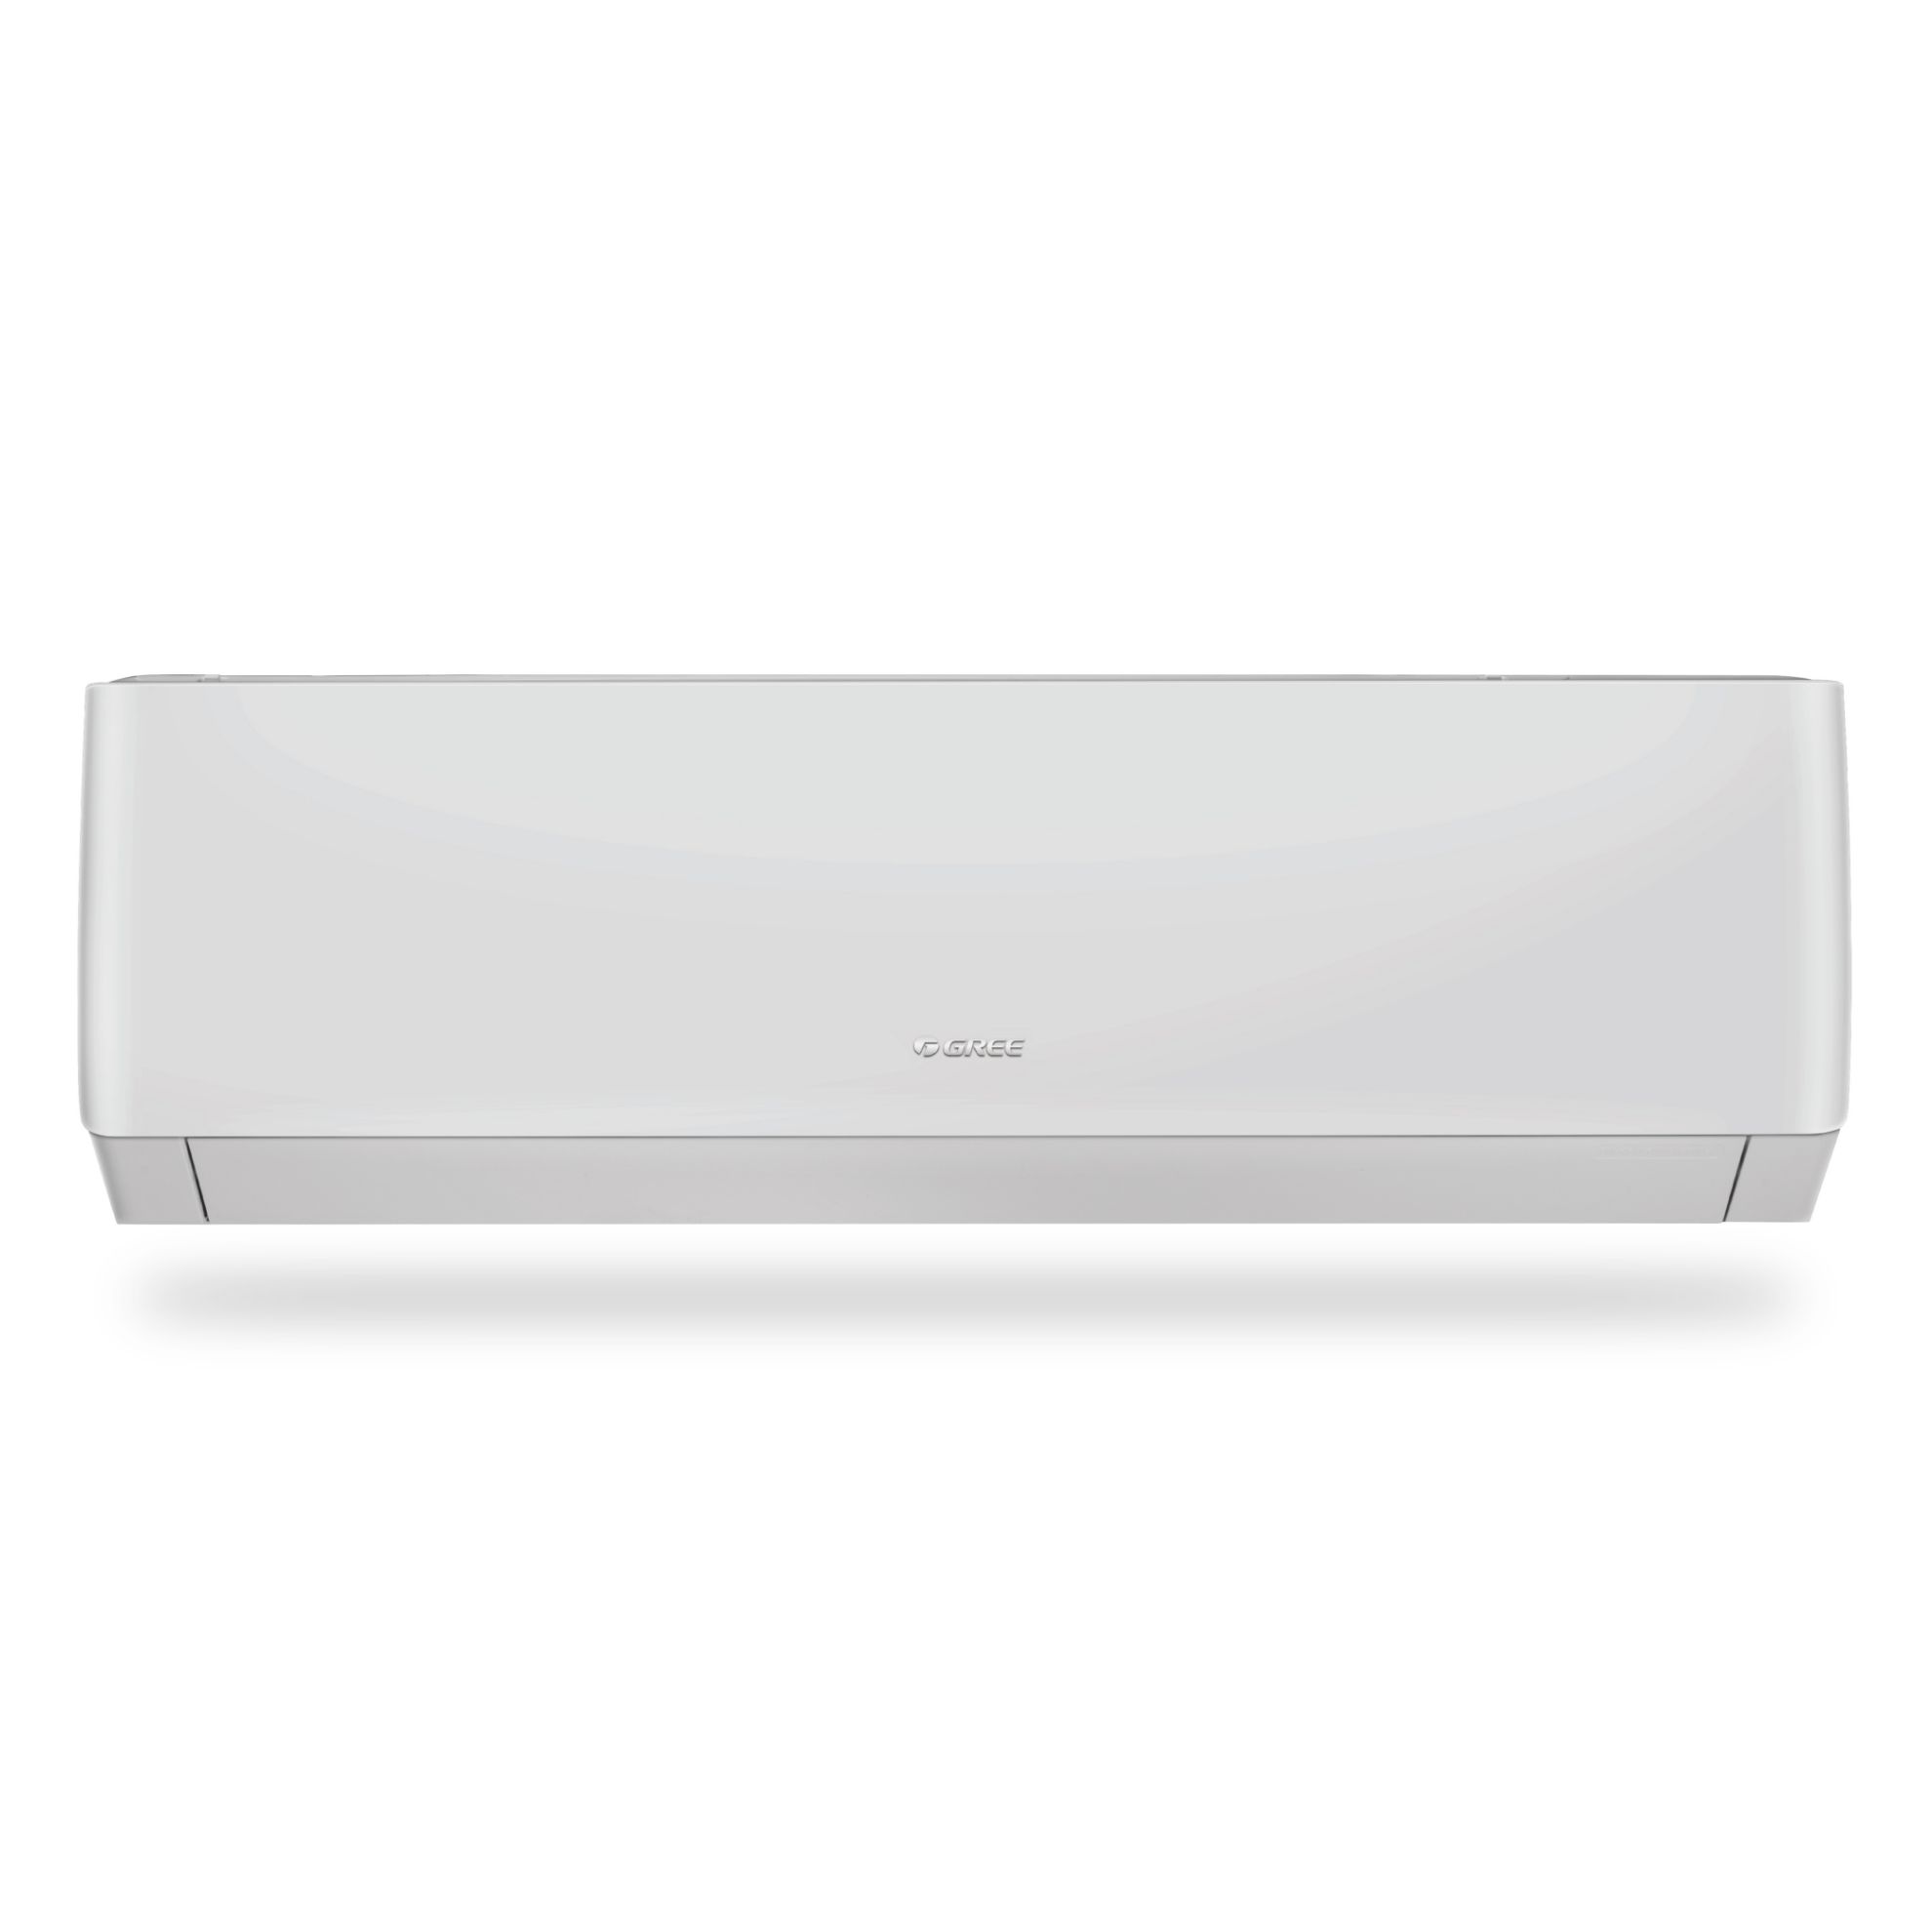 Picture of Gree - iSAVE PLUS-P30H3 - 2.5 Ton|Inverter|Wall Split AC